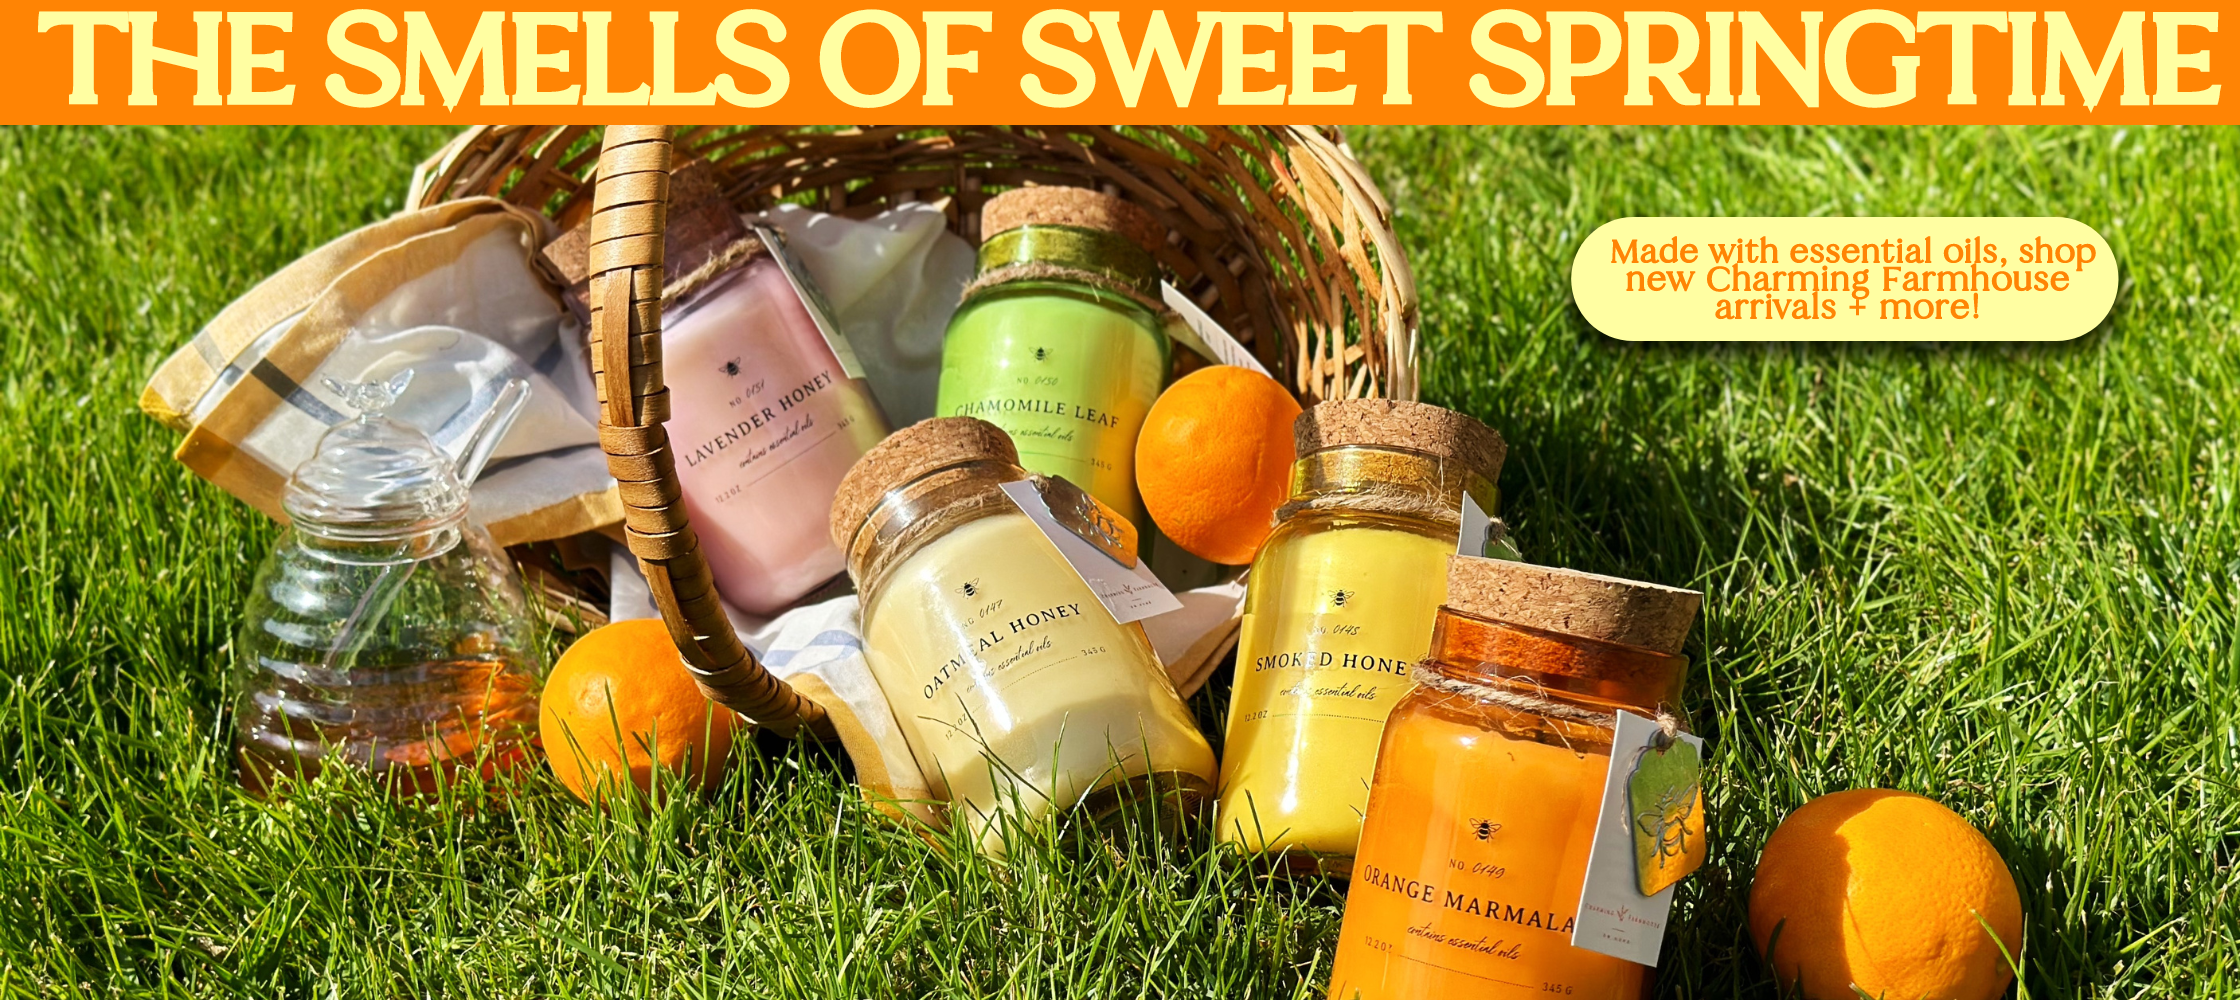 The Smells Of Sweet Springtime Banner. 5 new Charming Farmhouse candles on a grass field.